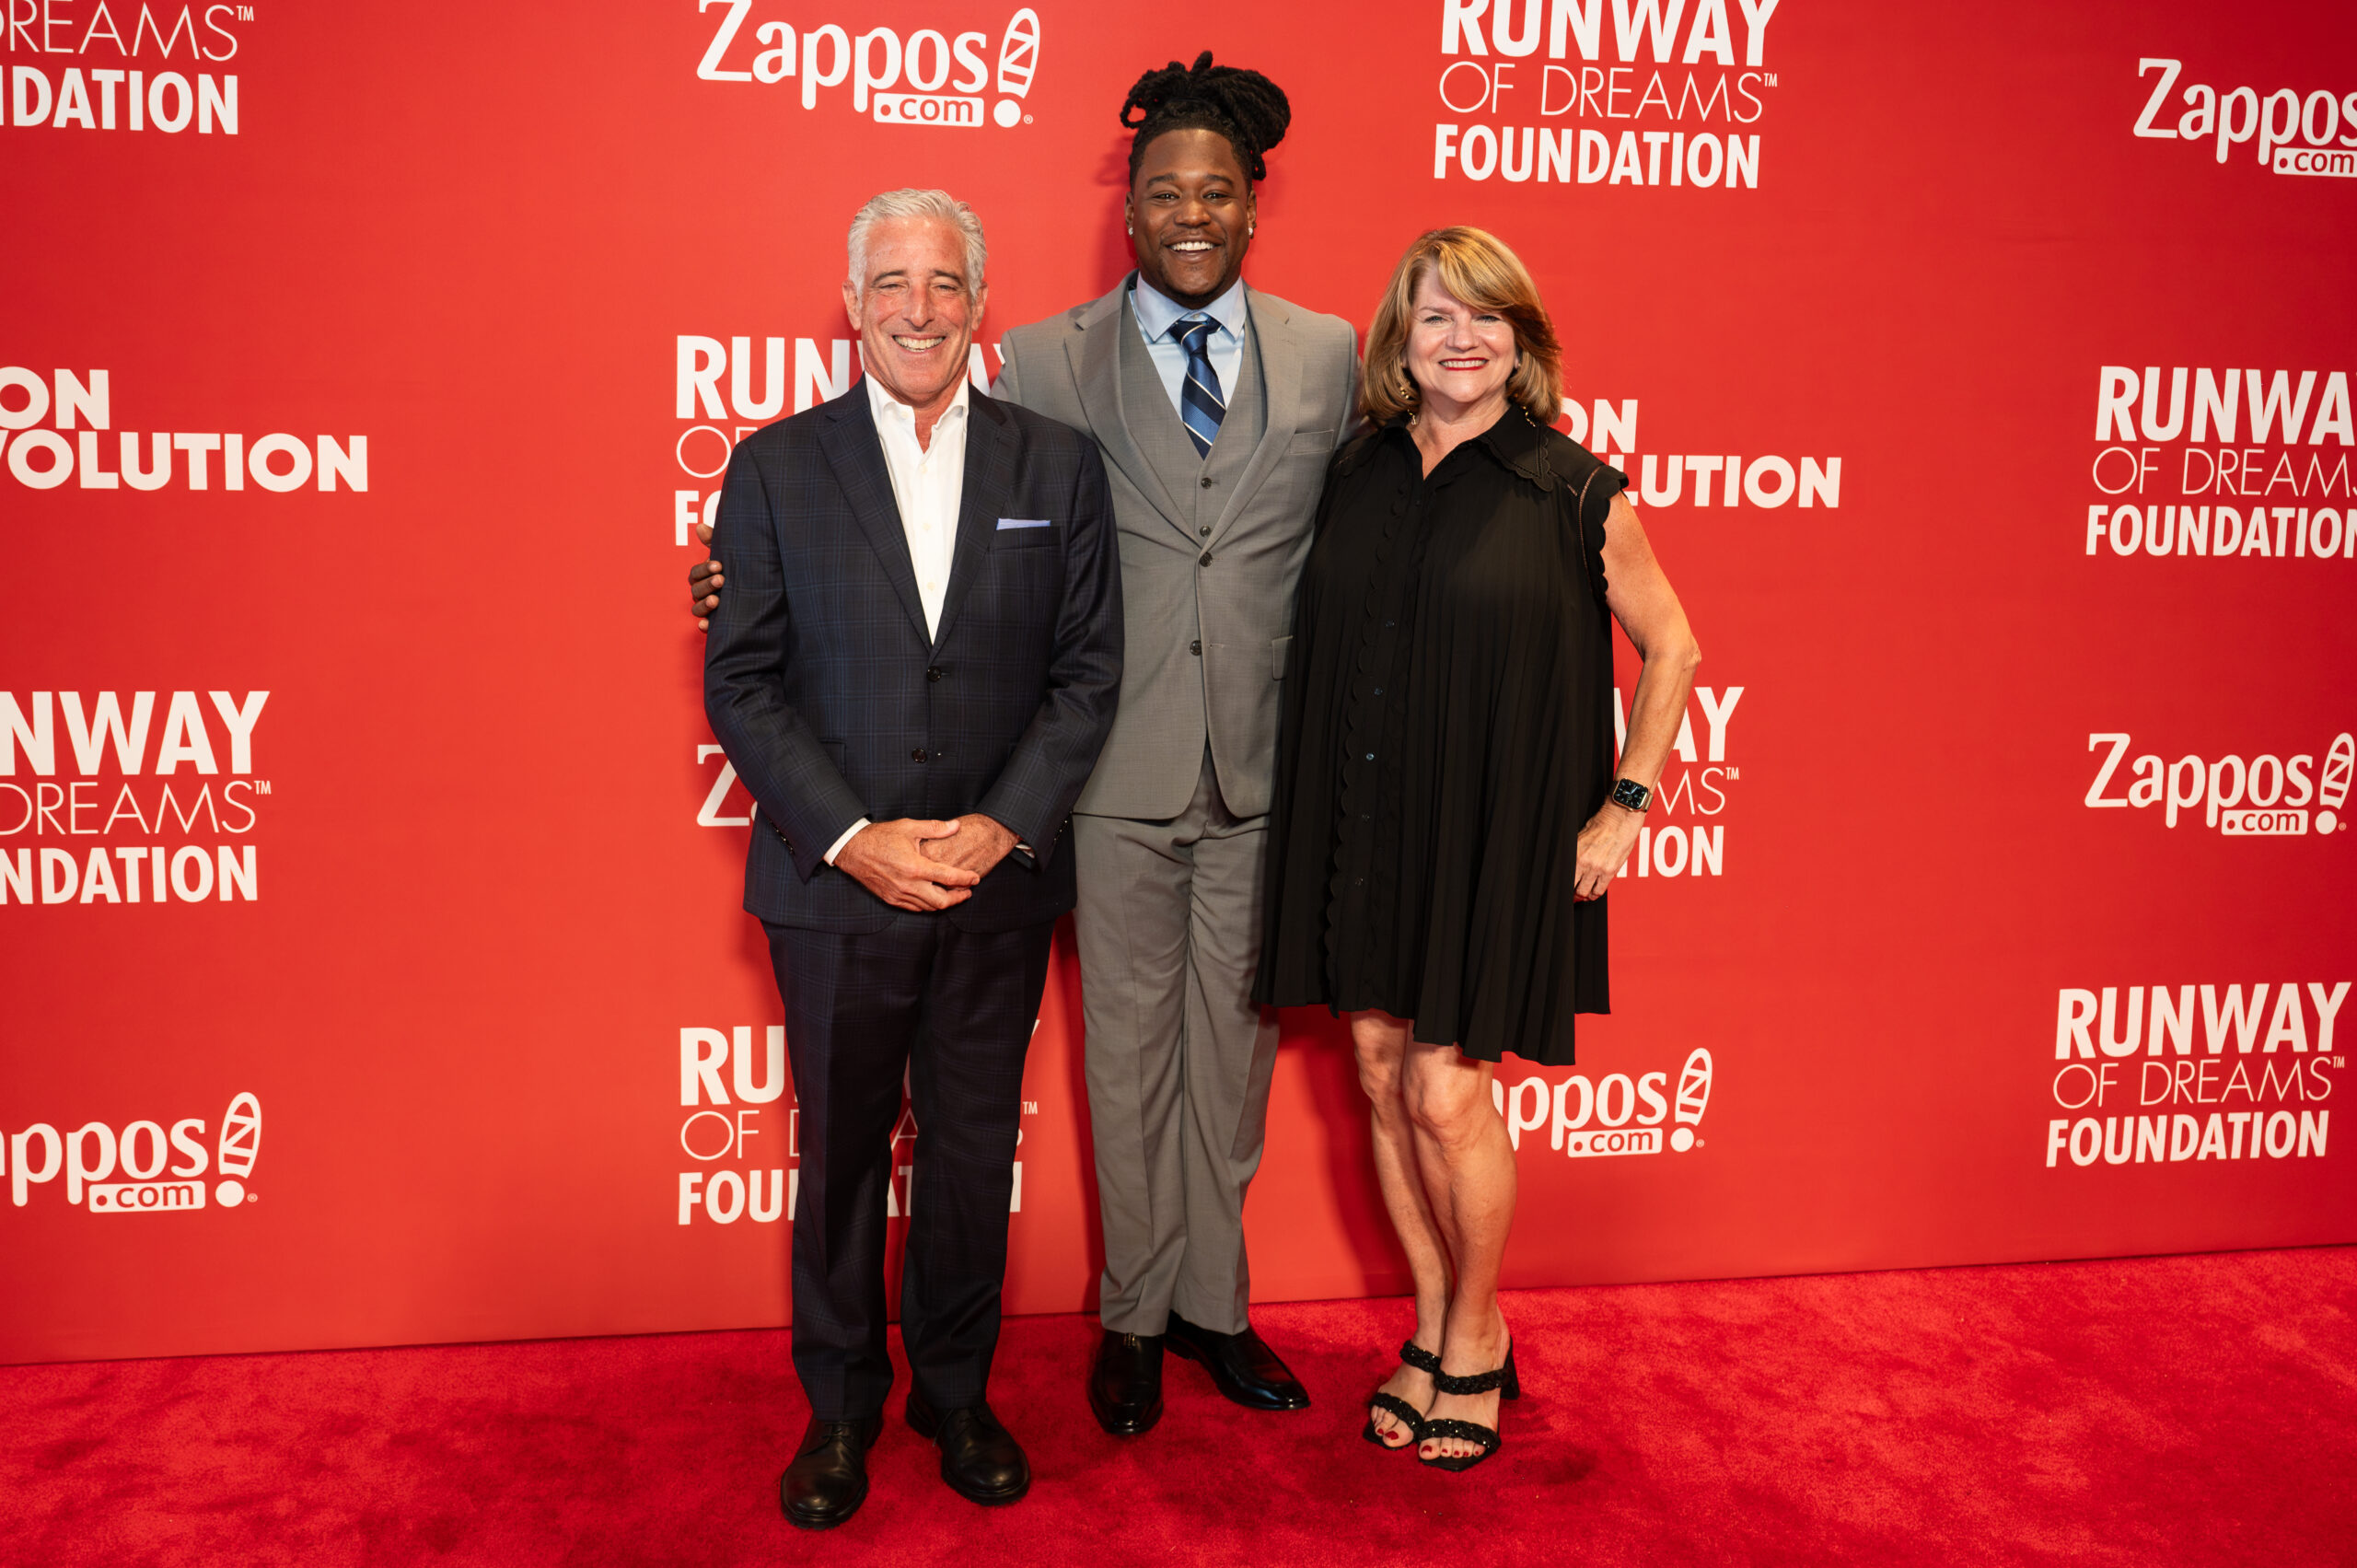 Gary Sheinbaum, Shaquem Griffin, and Dawn Robertson posing on the red carpet.